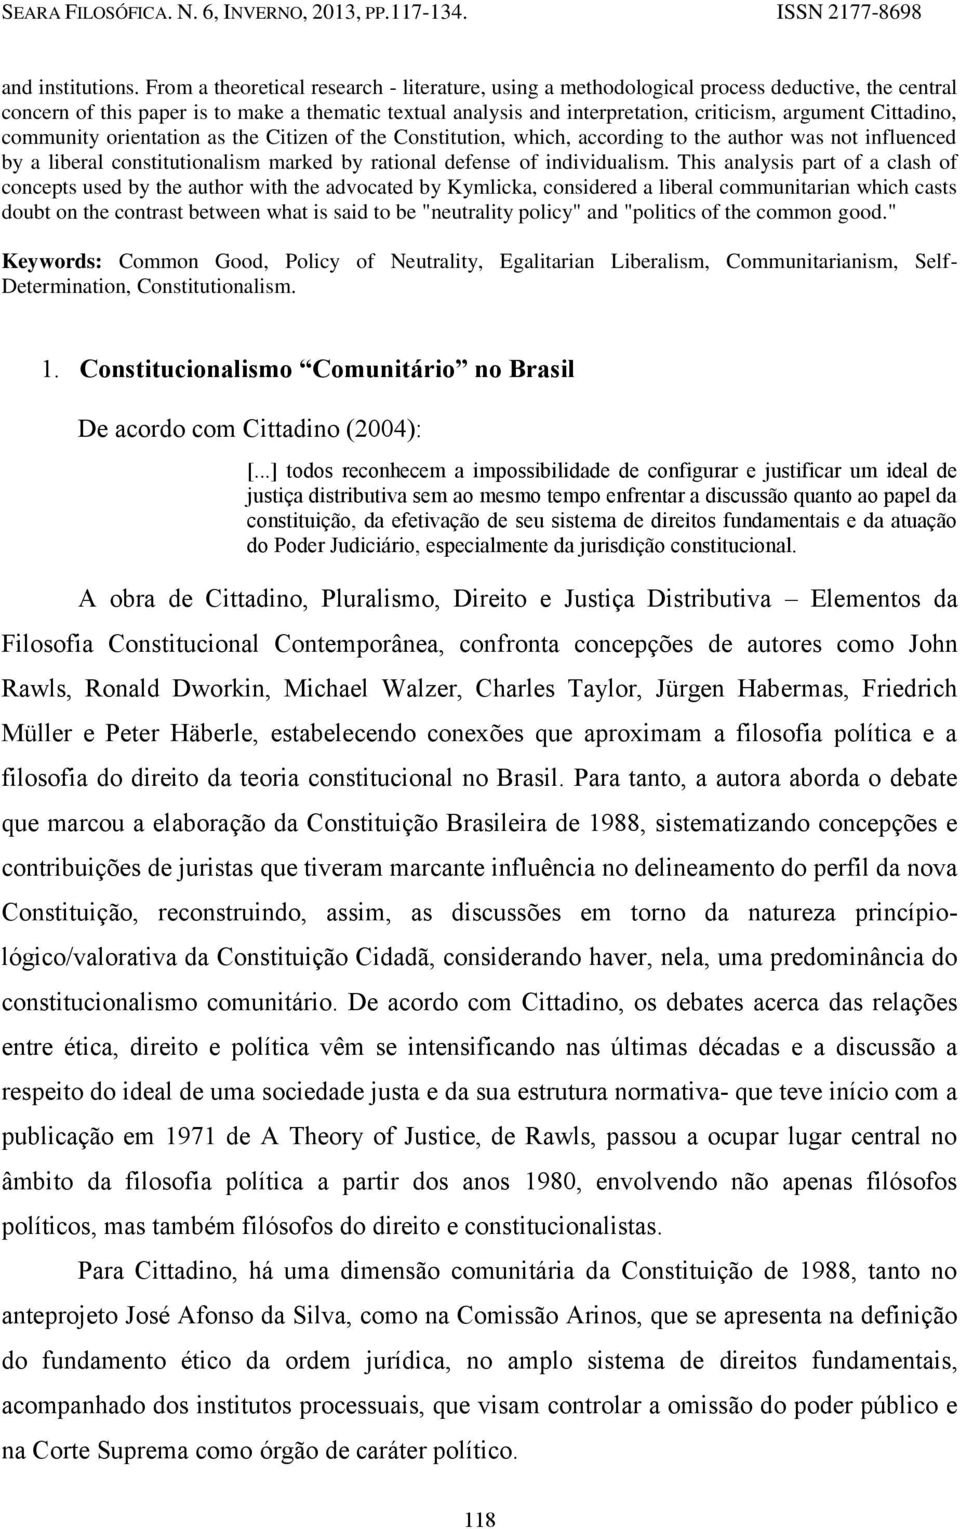 Cittadino, community orientation as the Citizen of the Constitution, which, according to the author was not influenced by a liberal constitutionalism marked by rational defense of individualism.